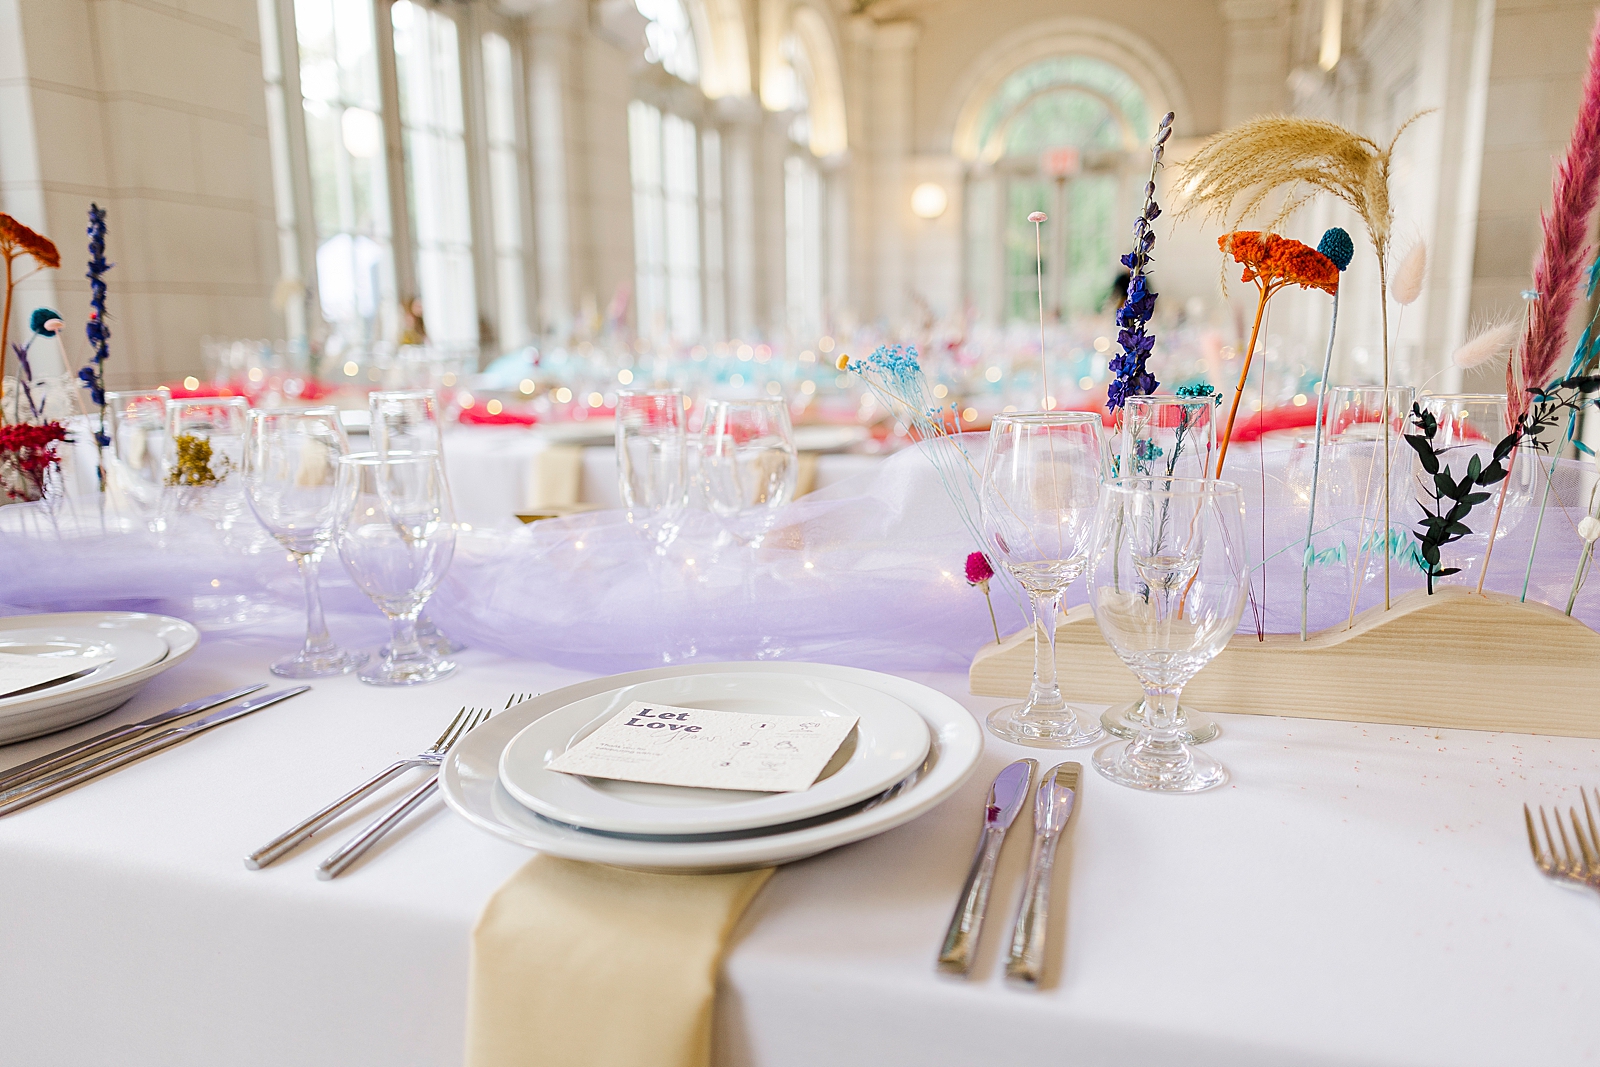 Shot of reception tables complete with glasses, plates, cutlery, floral arrangements, and colorful tulle centerpieces.